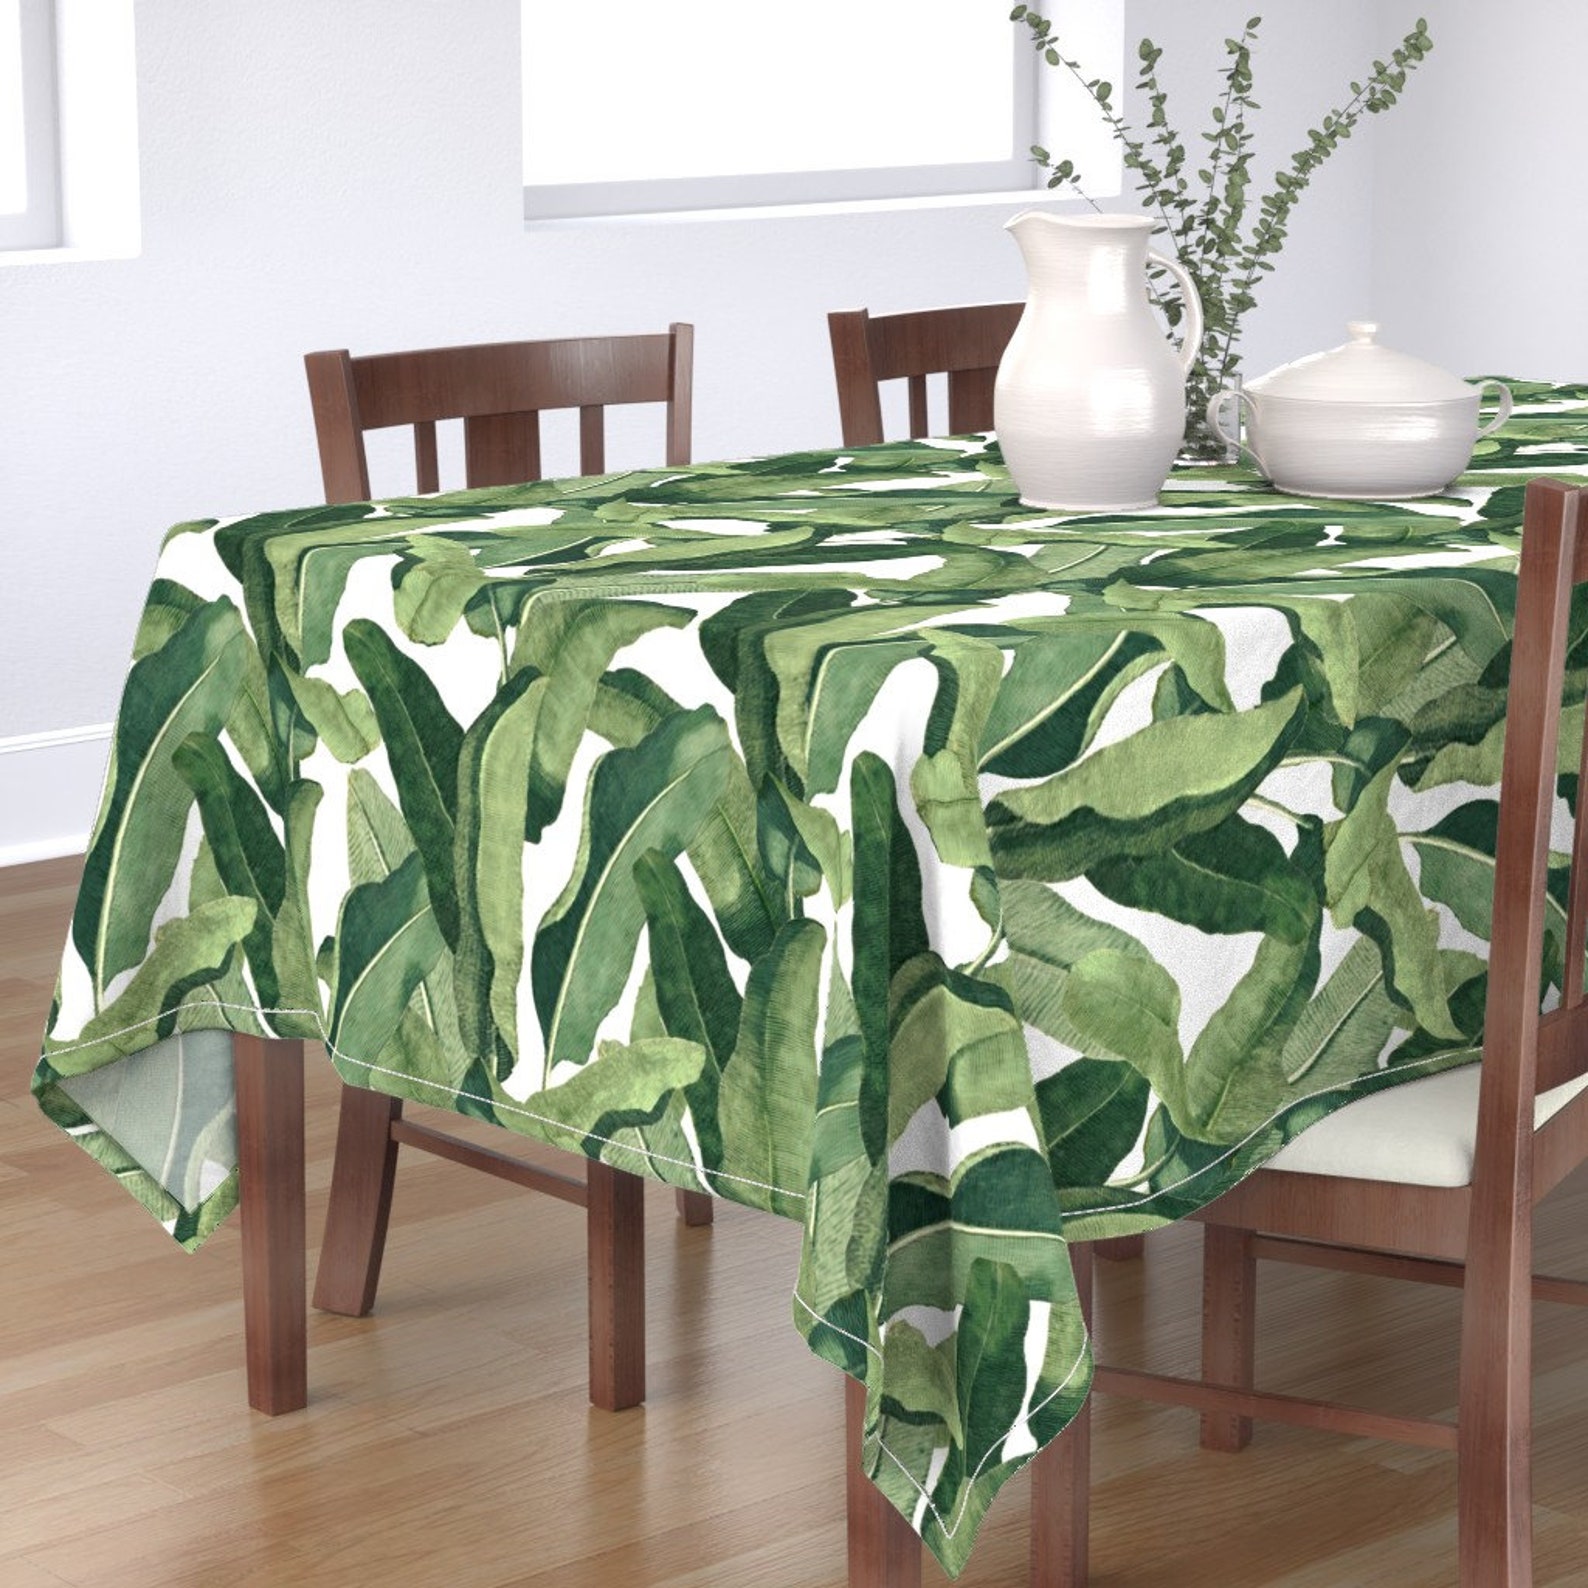 Banana Leaf Tablecloth Tropical Leaves by willowlanetextiles | Etsy